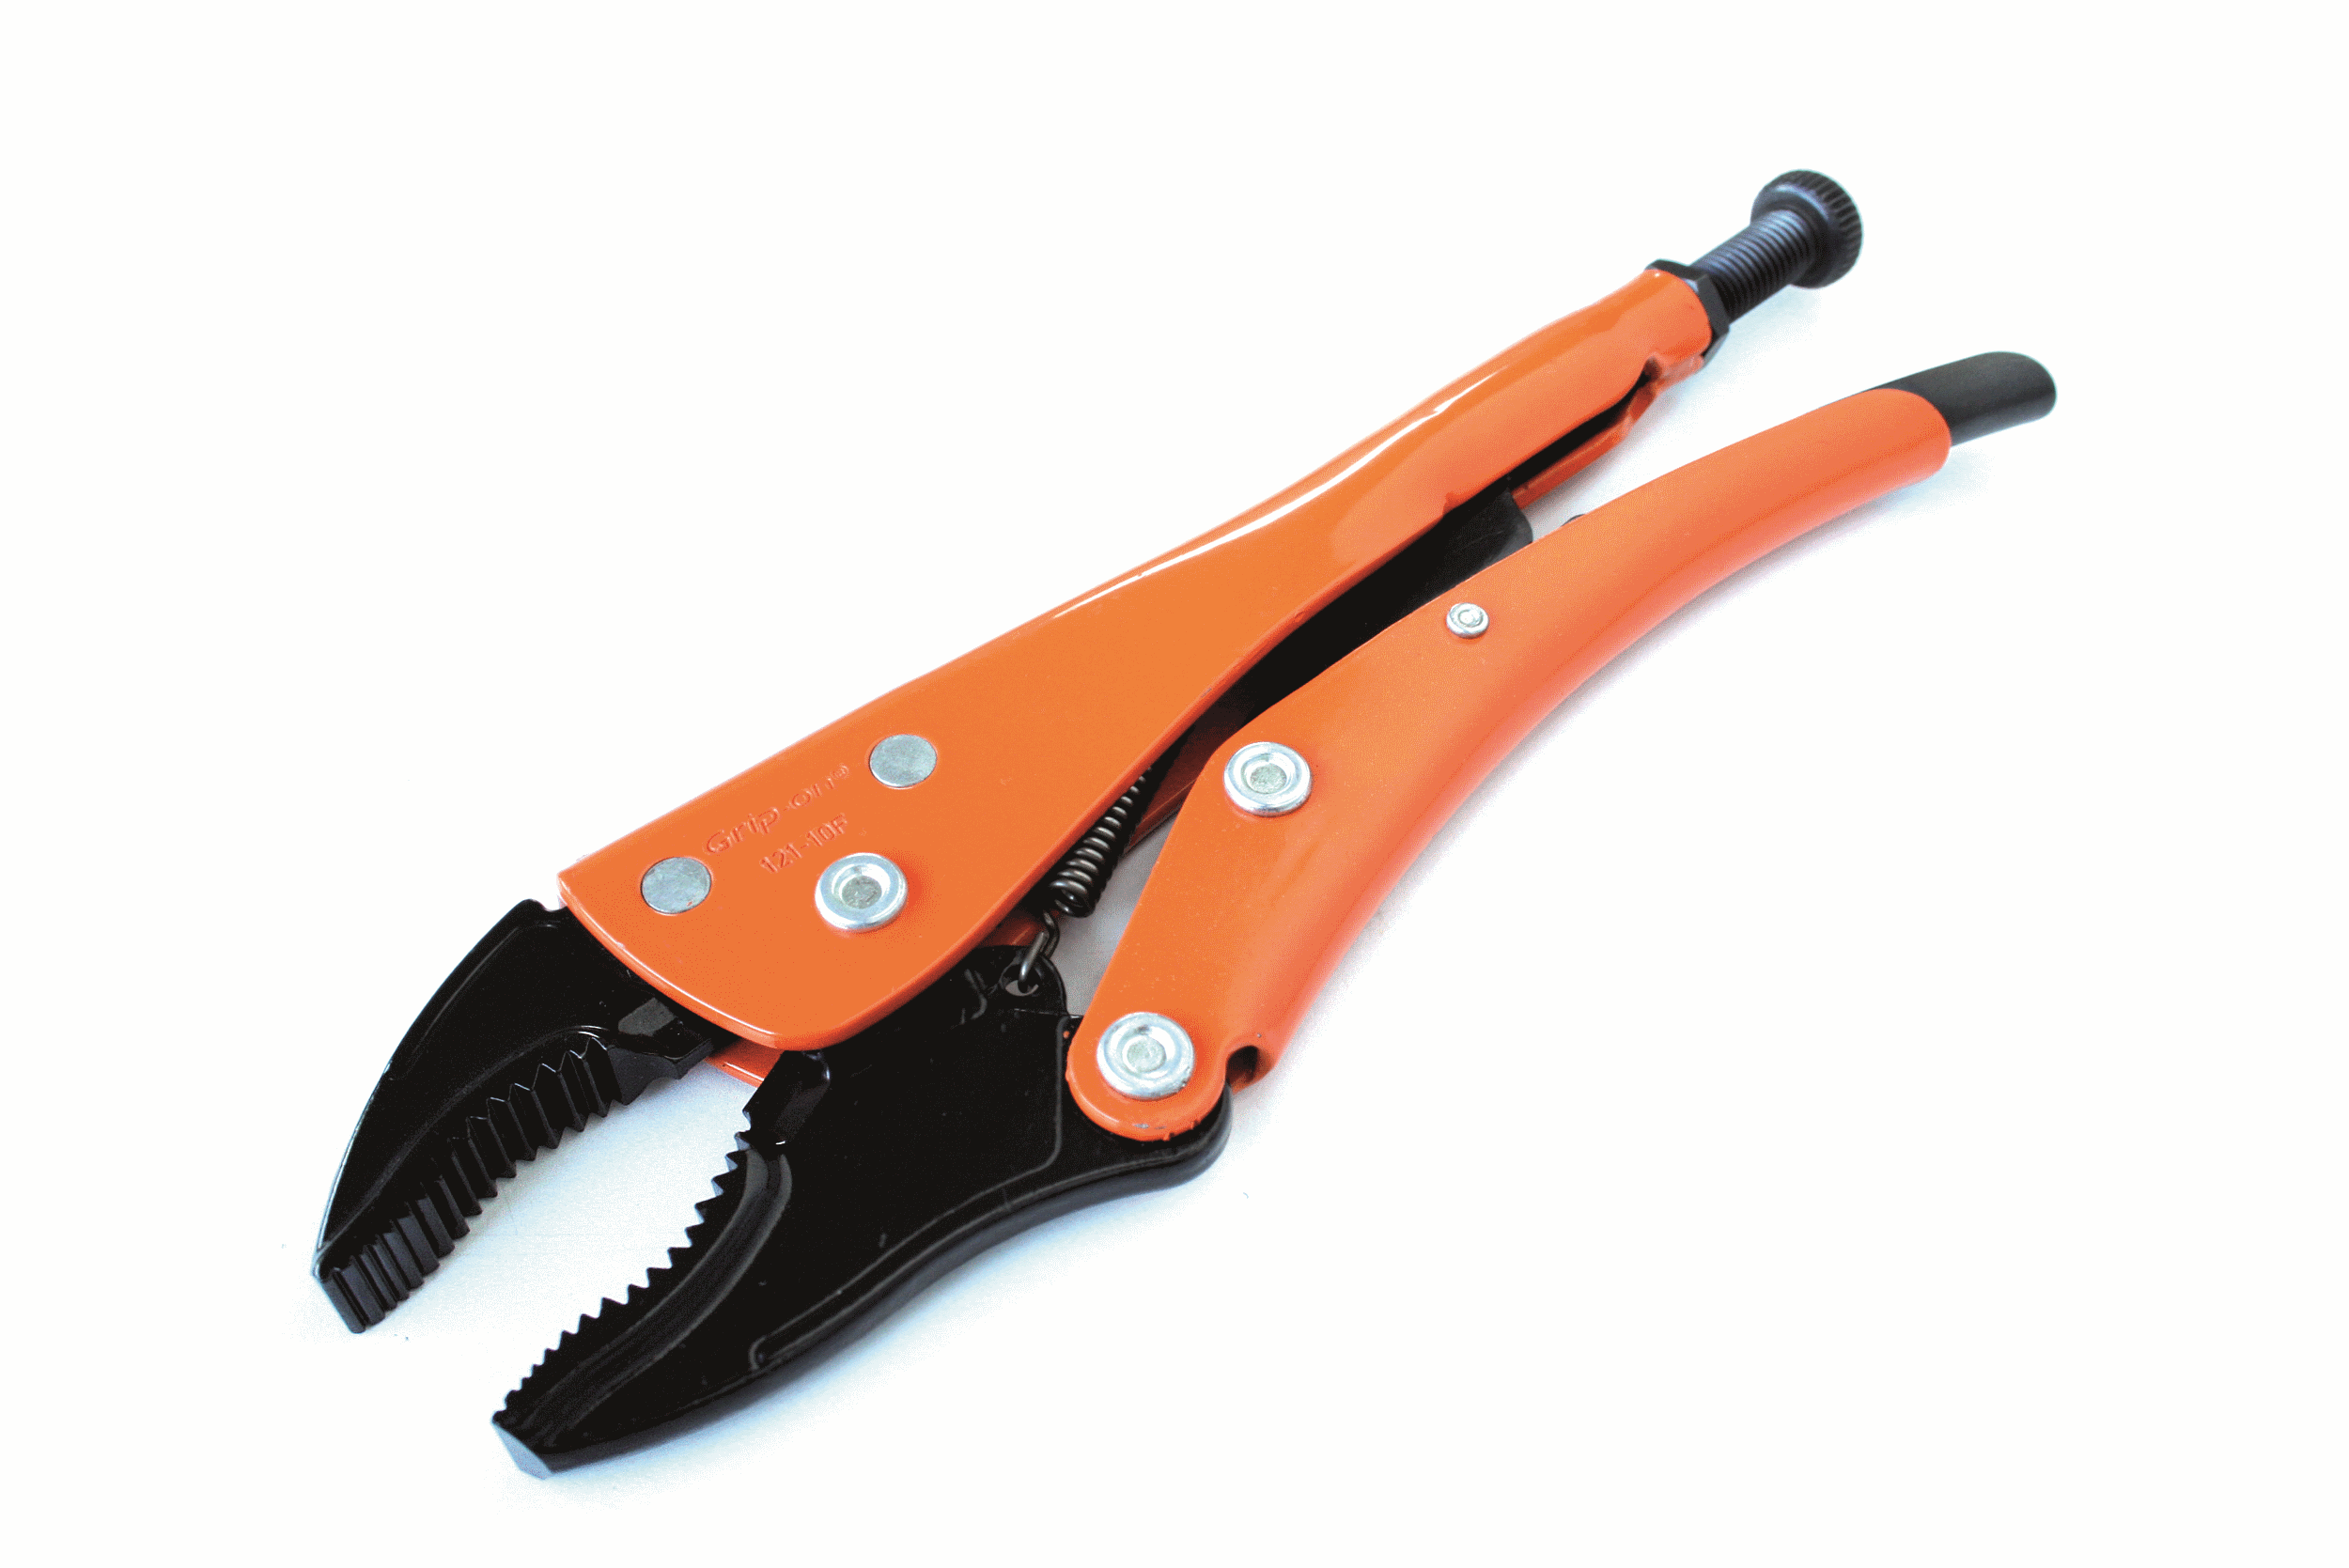 GRIP-ON Round jaws with wire cutter